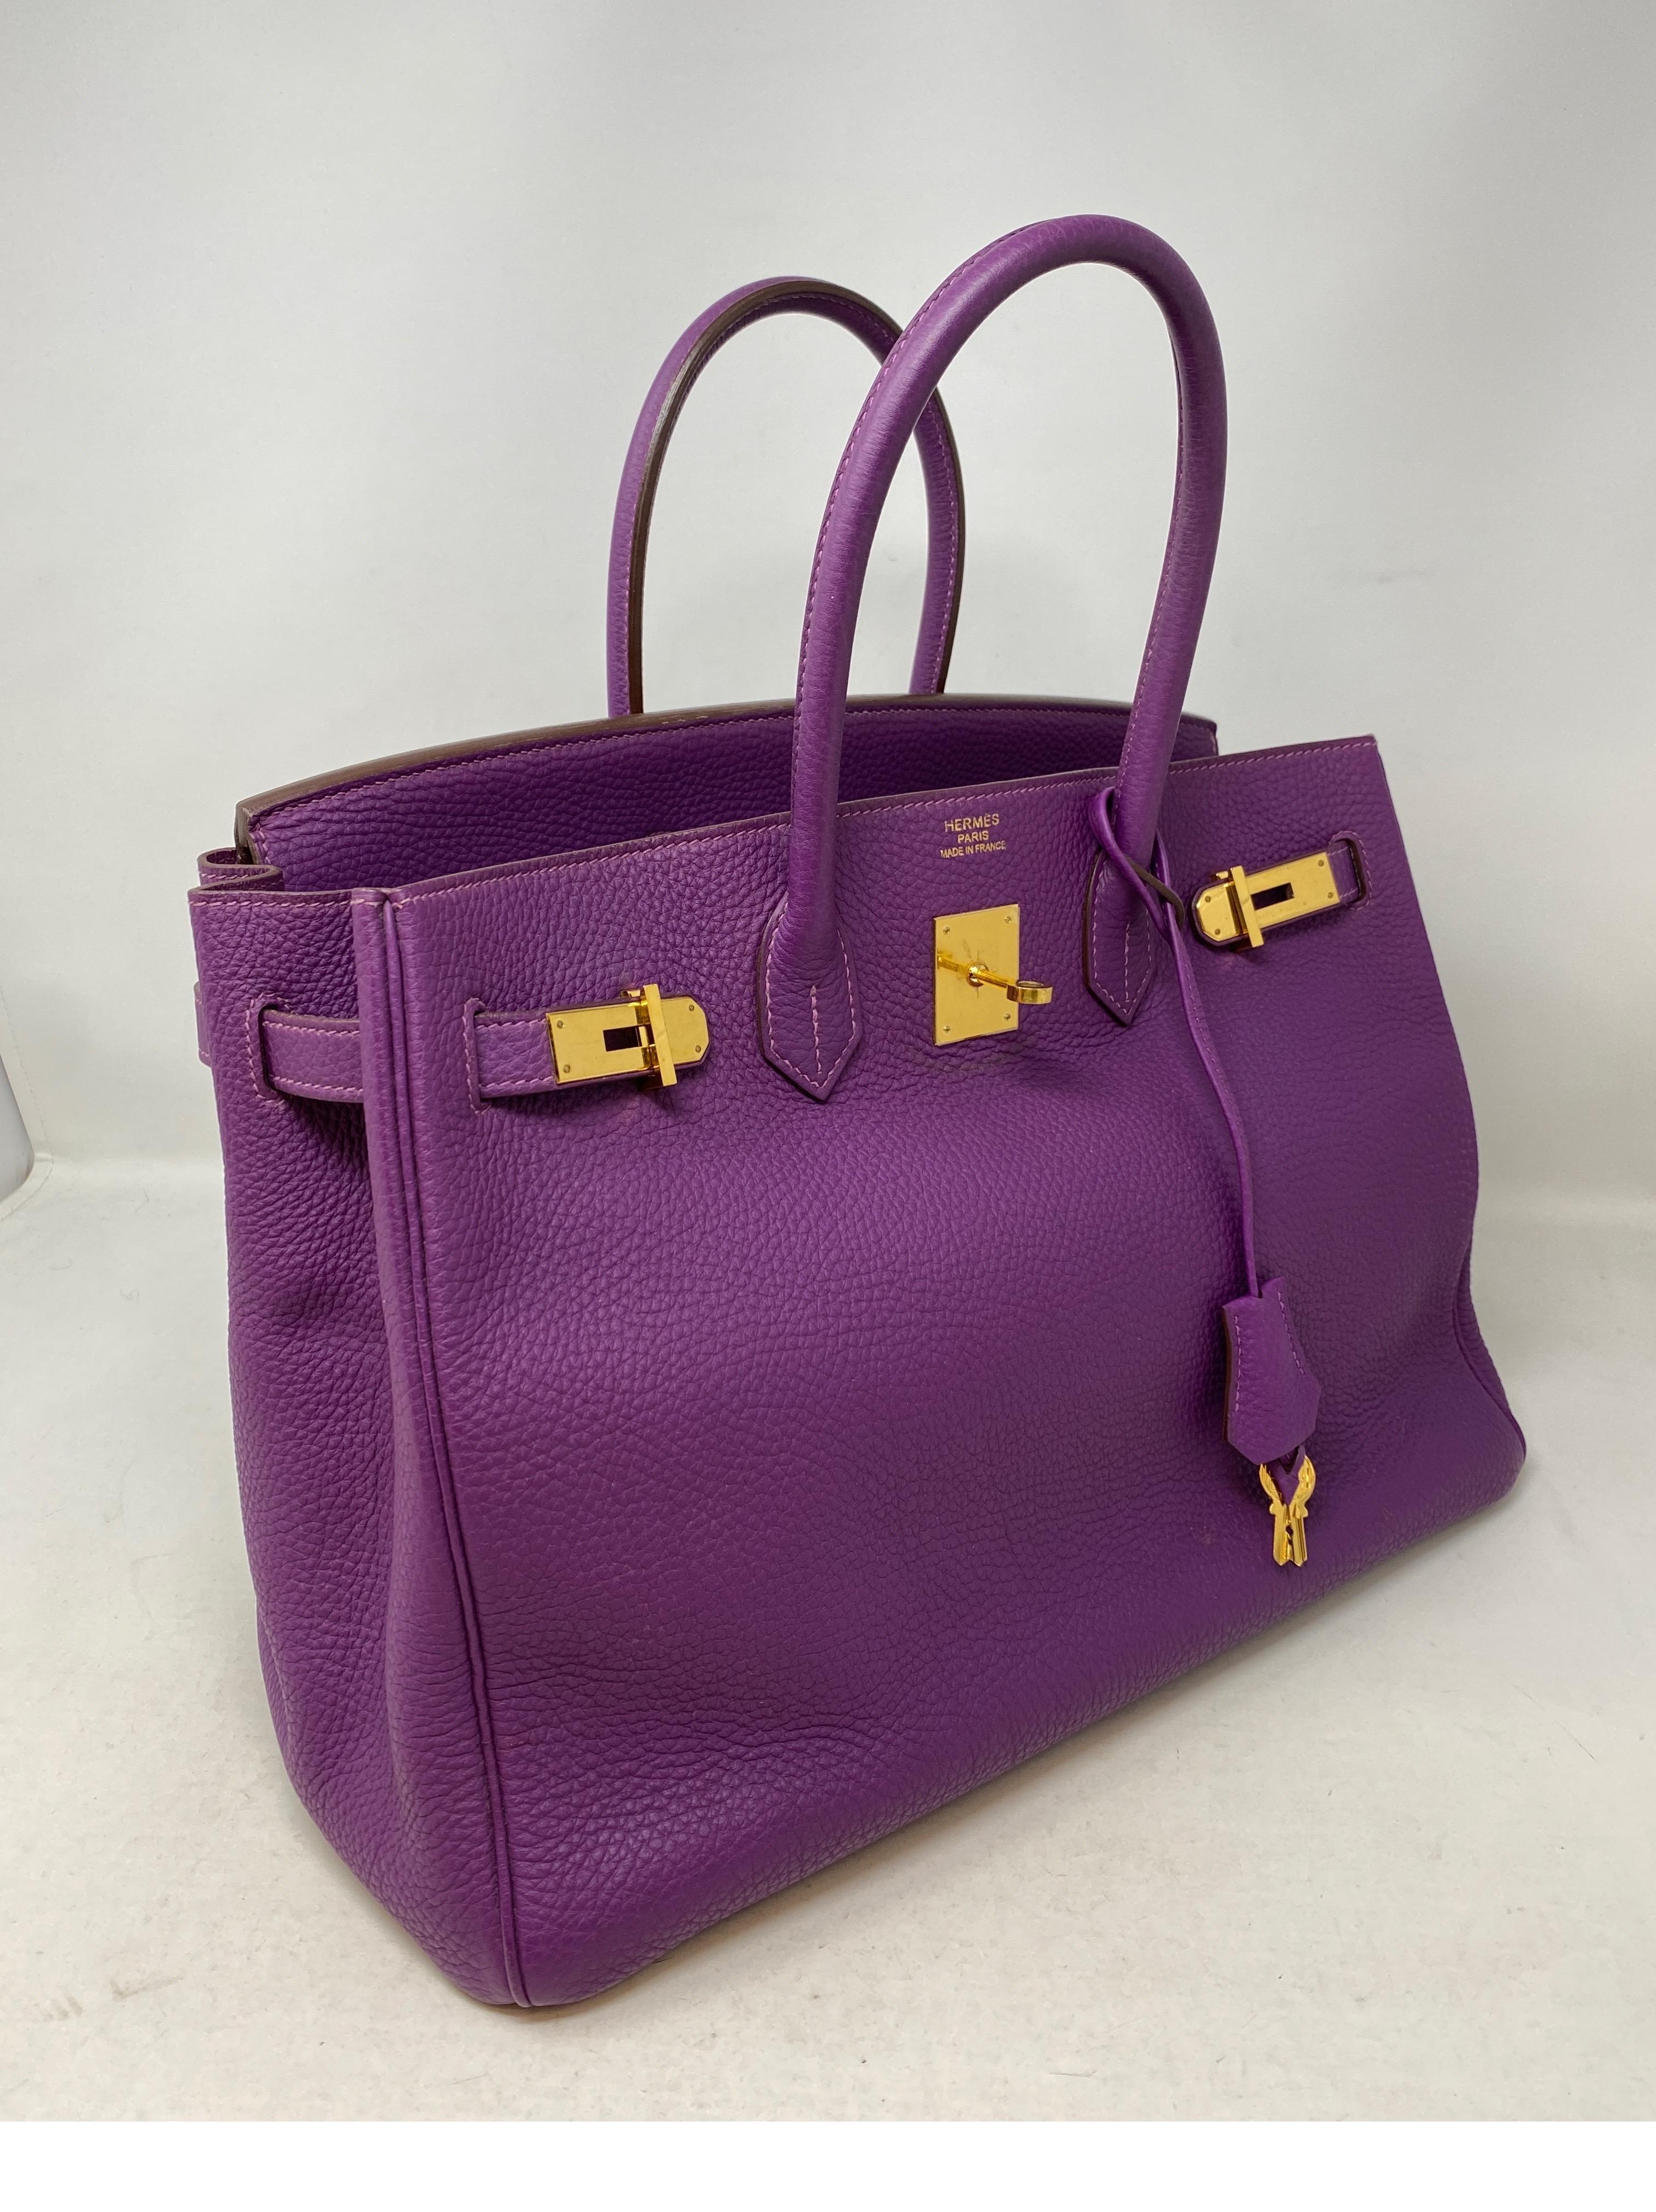 Hermes Birkin Anemone 35 Bag. Nice purple color togo leather with gold hardware. Good condition. Light wear and slight slouch. Beautiful color. Includes clochette, lock, keys, and dust cover. Guaranteed authentic. 